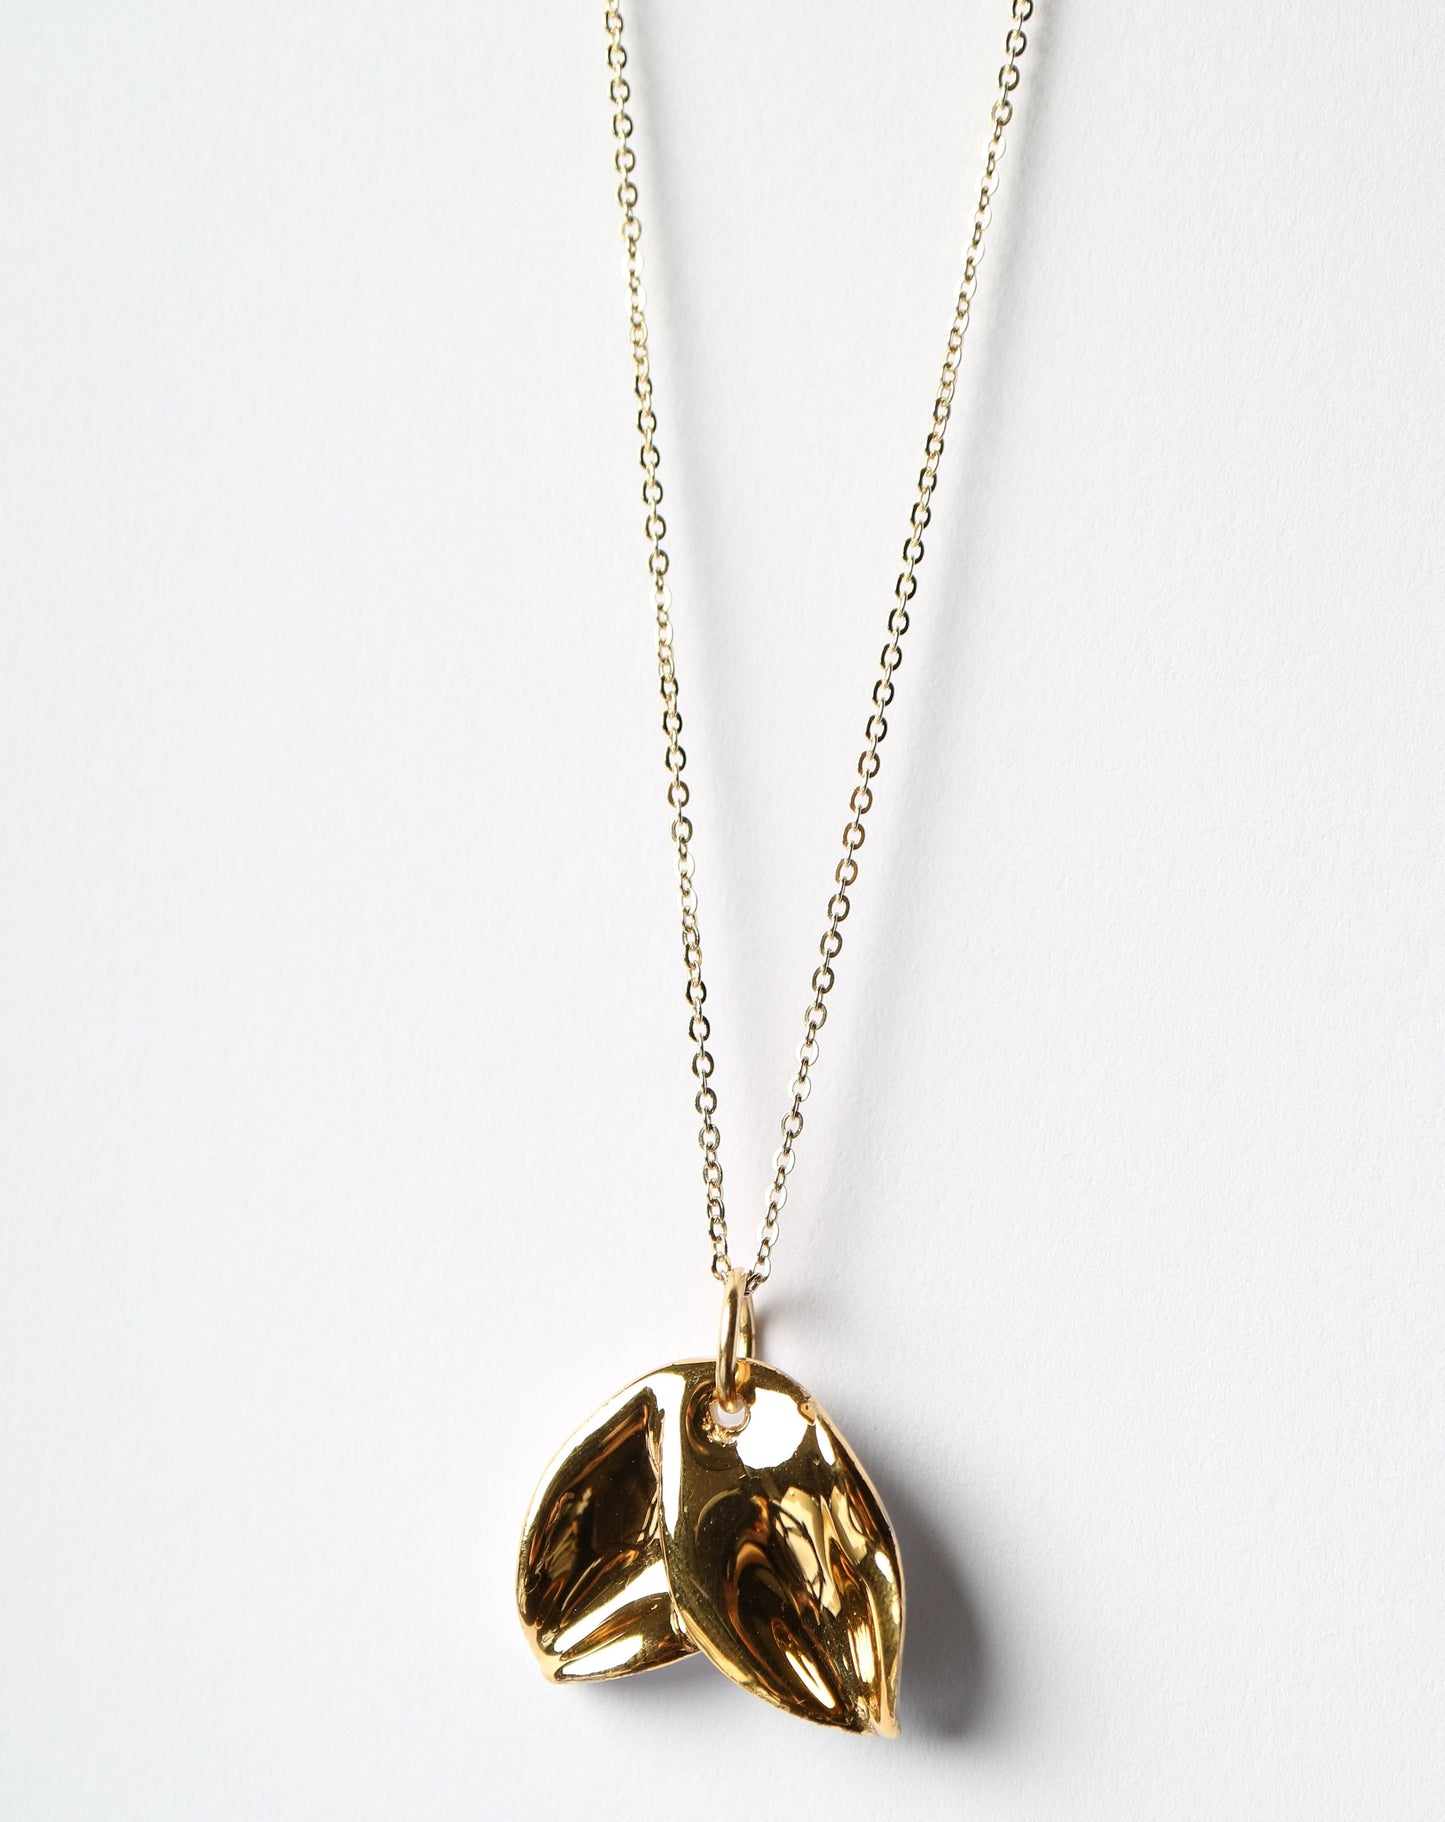 Wild Orchid Porcelain necklace in gold